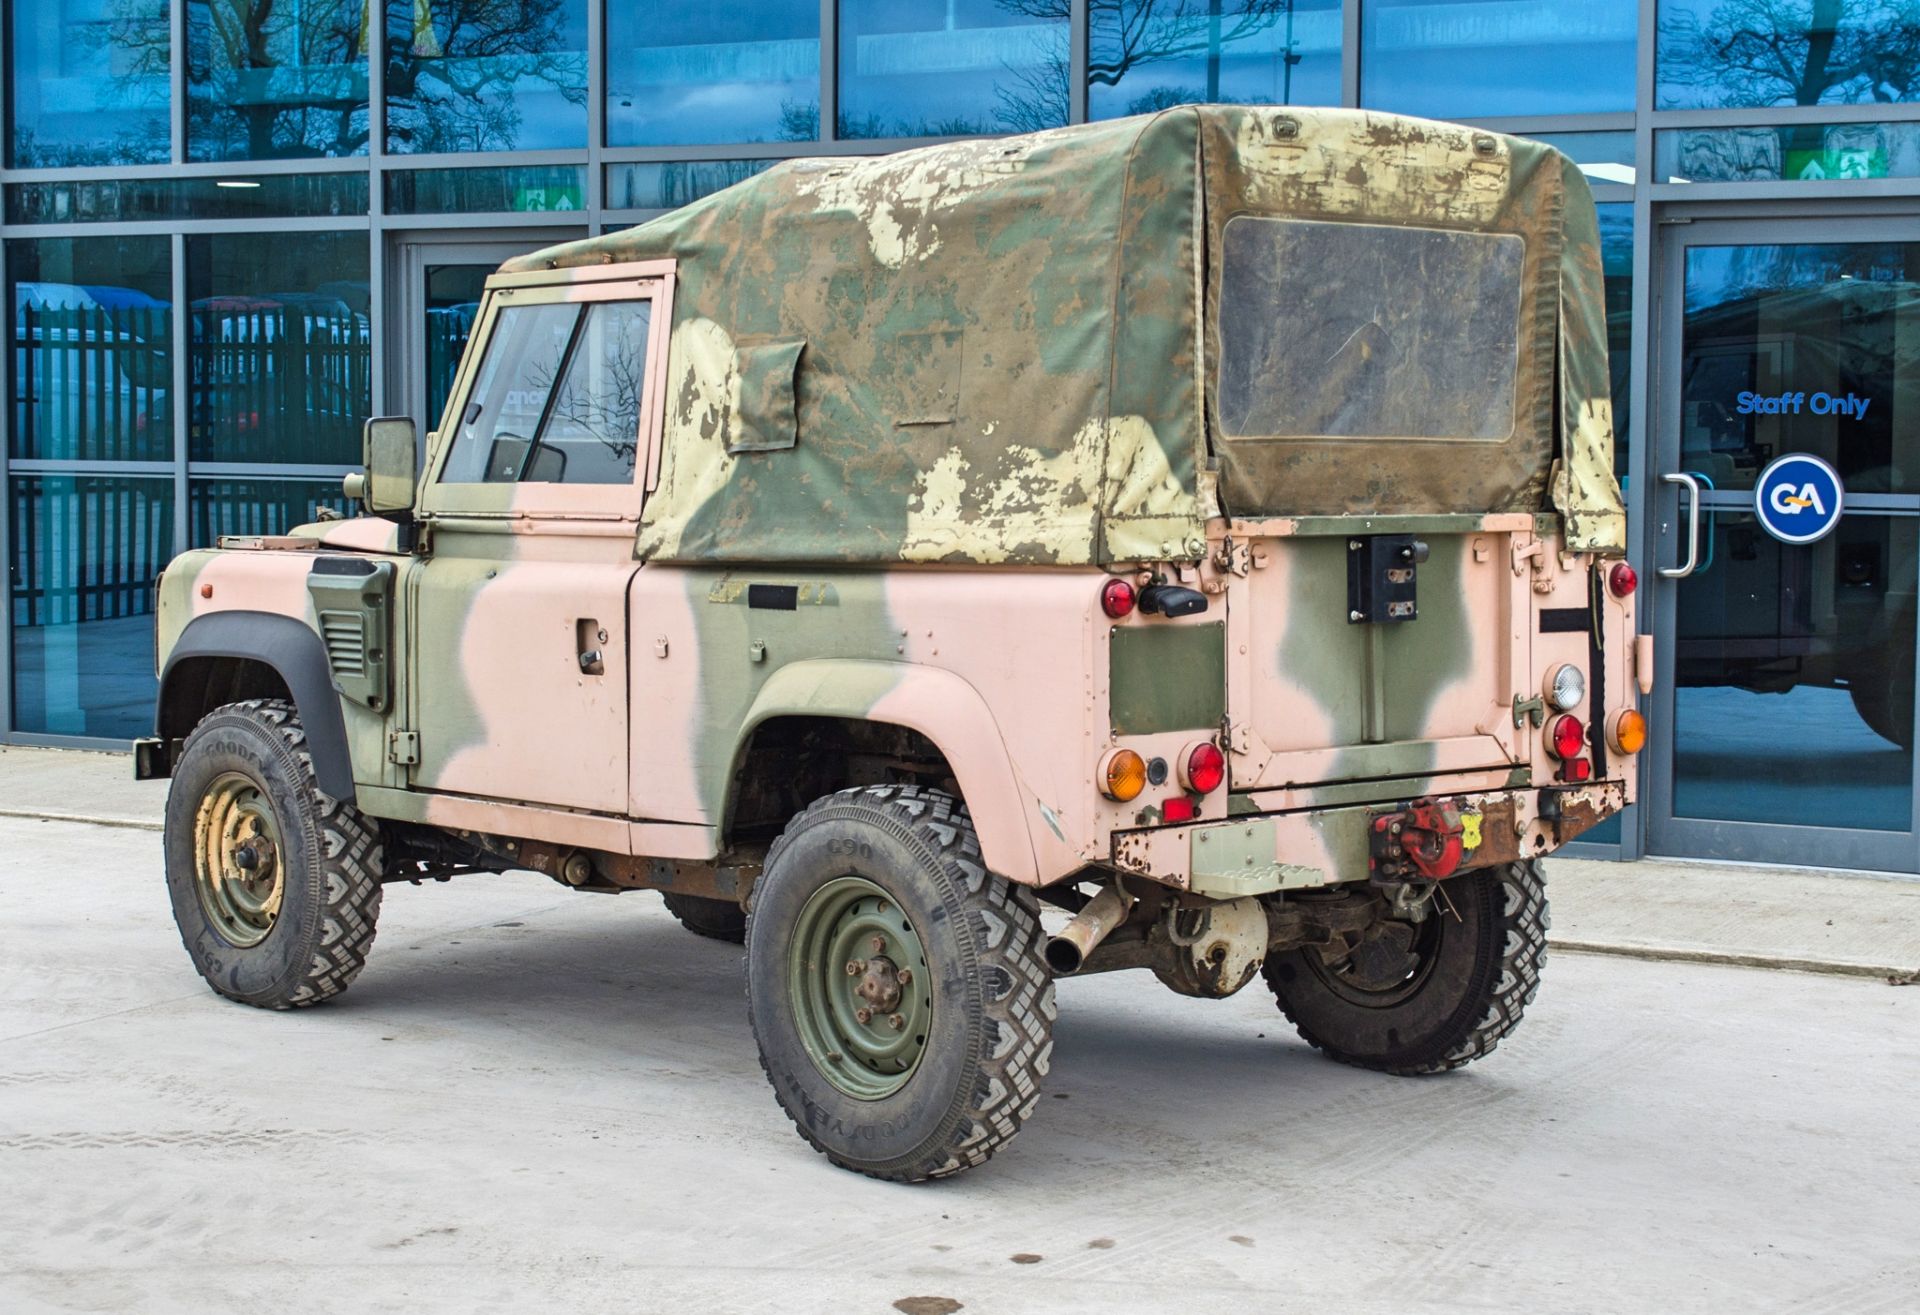 1997 Land Rover Defender 90 WOLF 2.5 litre 300TDI 4 wheel drive utility vehicle Ex MOD - Image 8 of 45